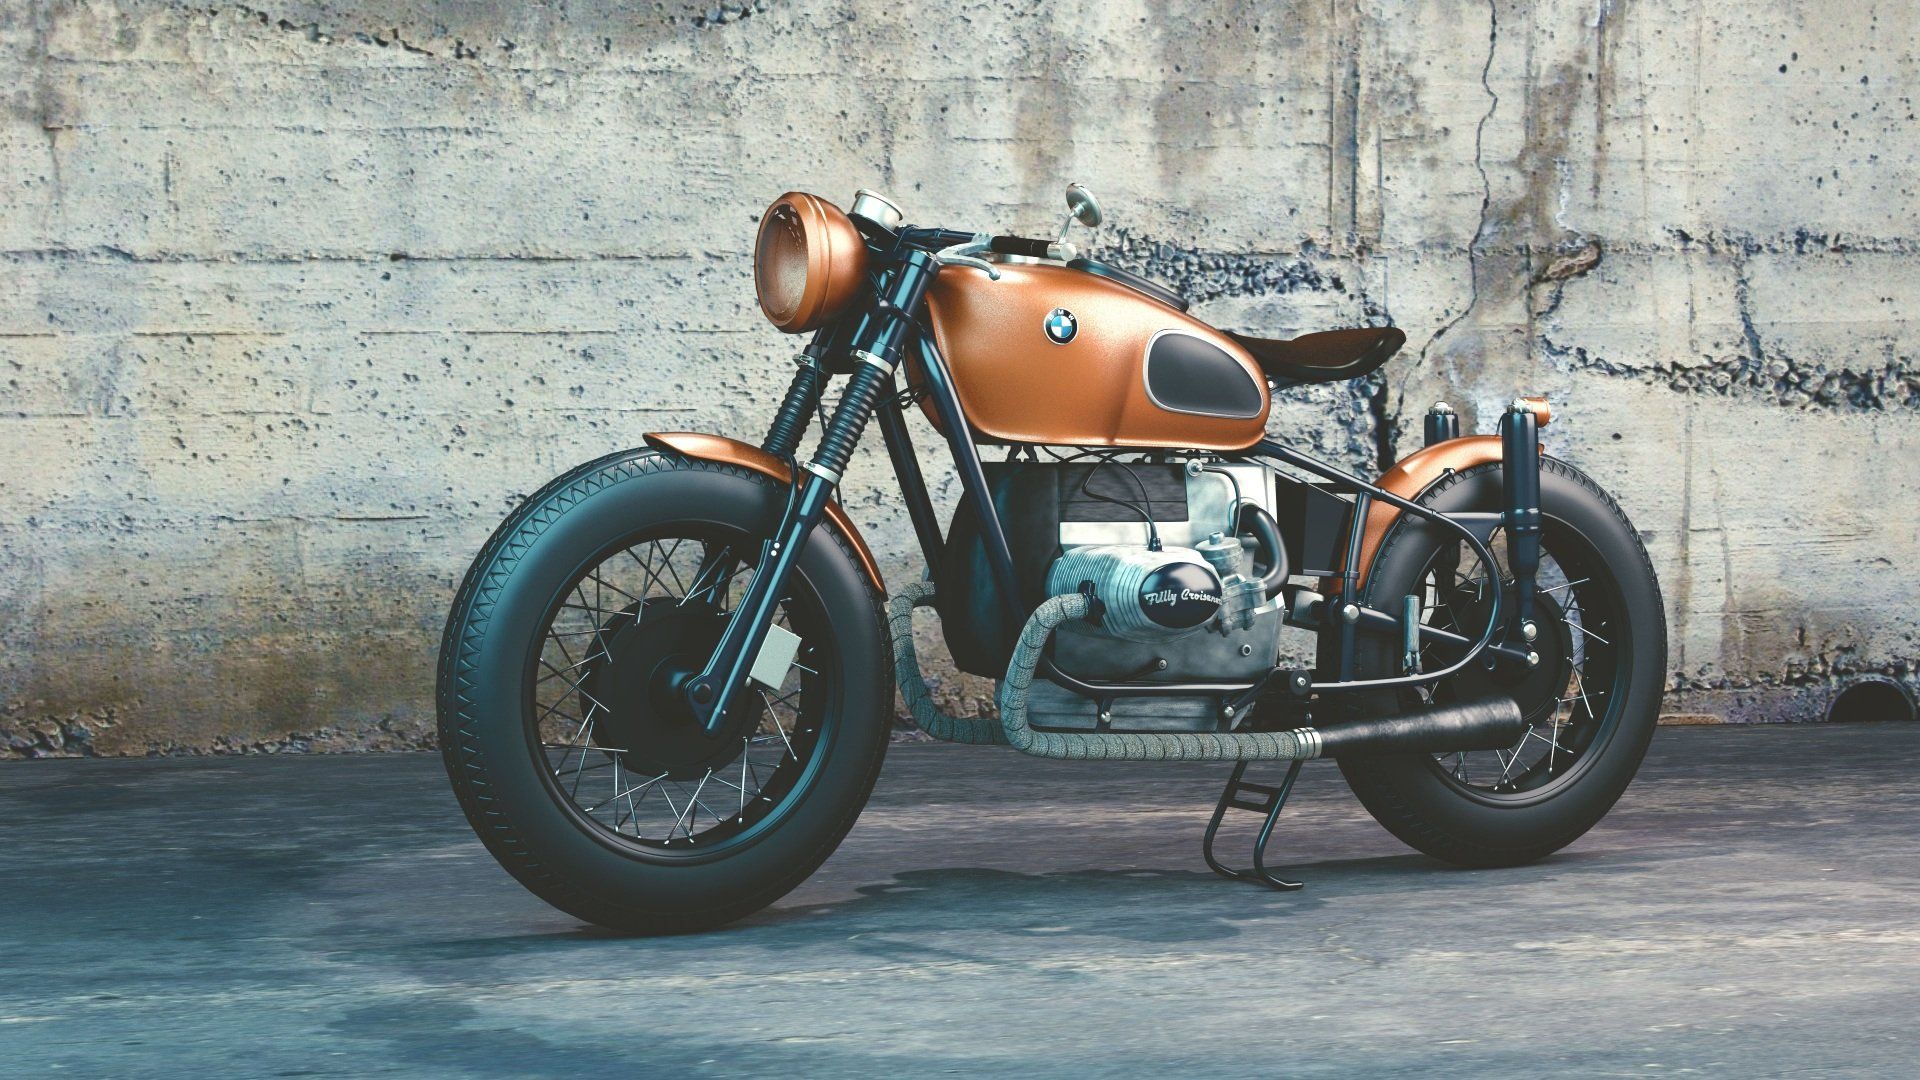 A classic BMW motorcycle